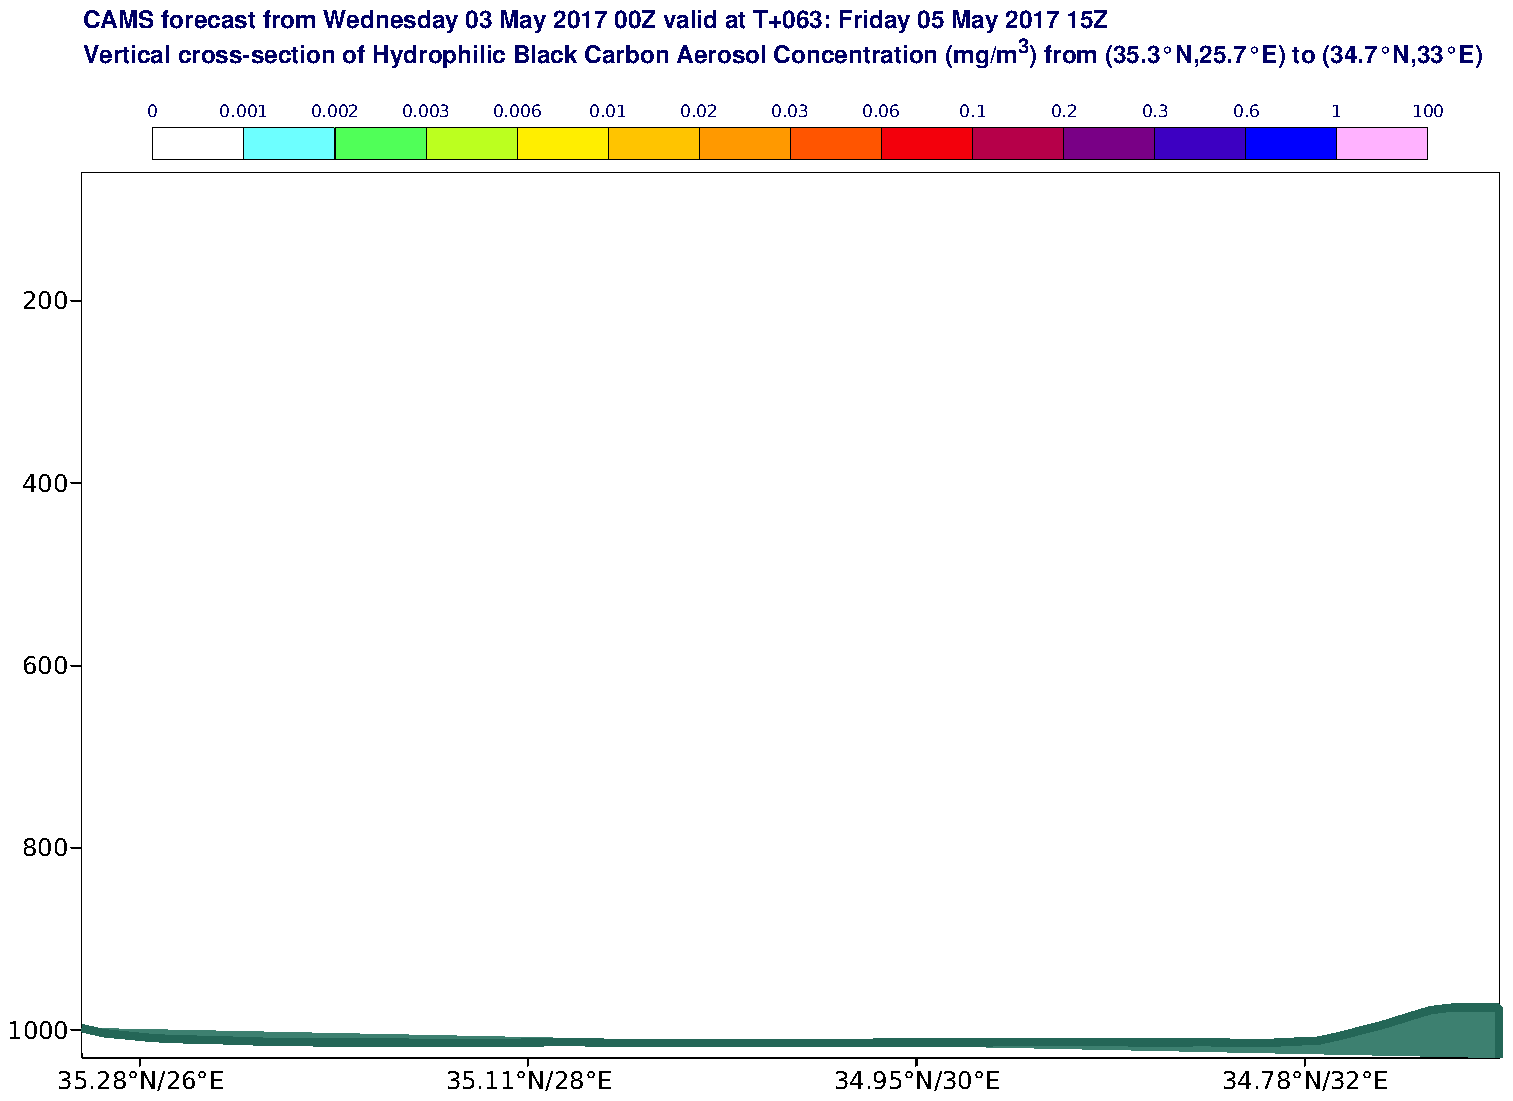 Vertical cross-section of Hydrophilic Black Carbon Aerosol Concentration (mg/m3) valid at T63 - 2017-05-05 15:00